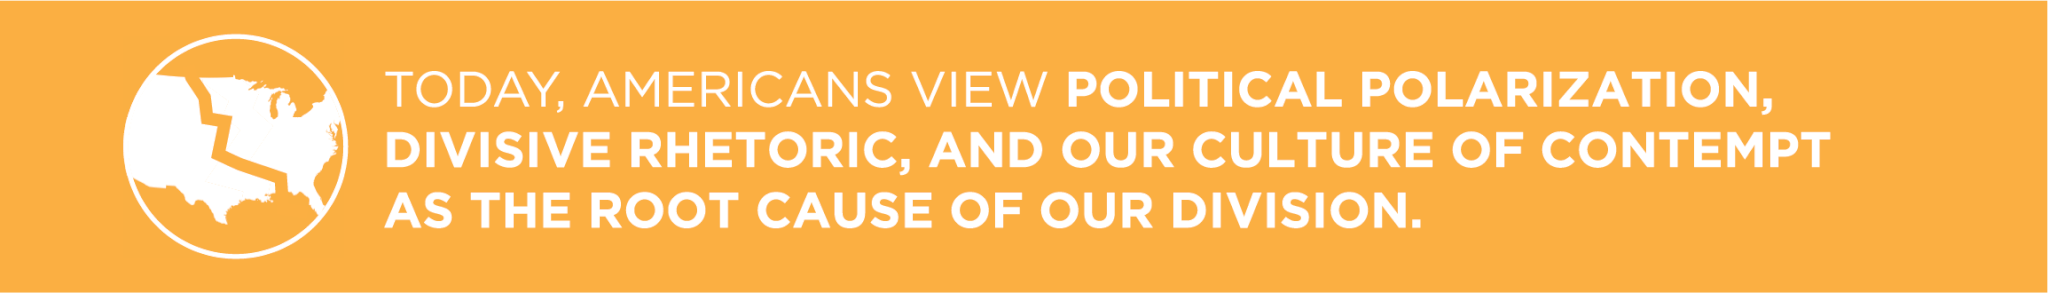 Today, Americans view political polarization, divisive rhetoric, and our culture of contempt as the root cause of our division.